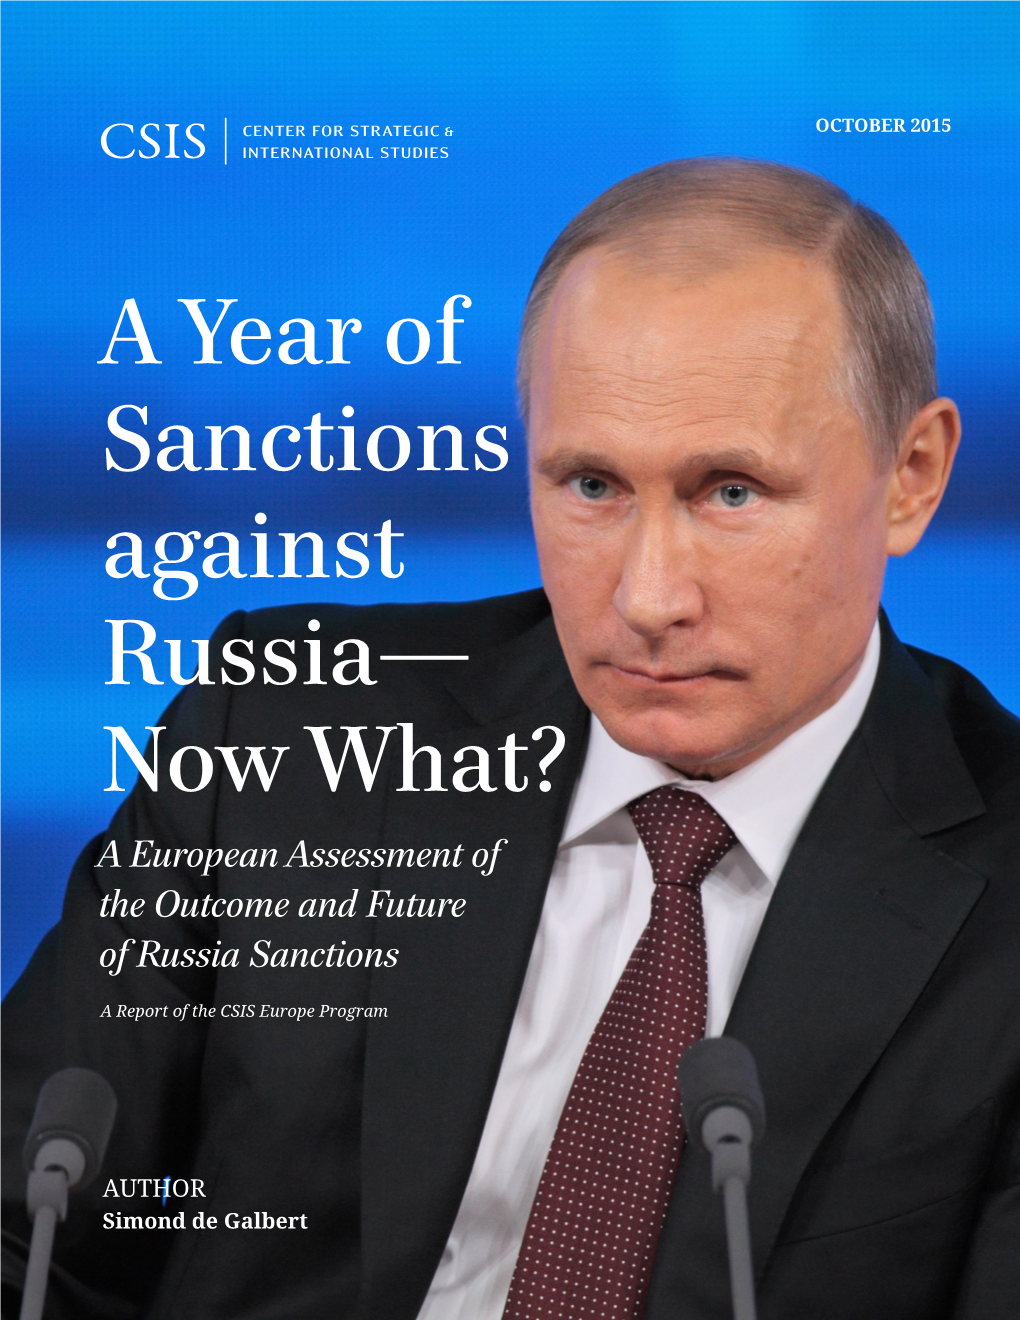 A Year of Sanctions Against Russia—Now What? a European Assessment of the Outcome and Future of Russia Sanctions